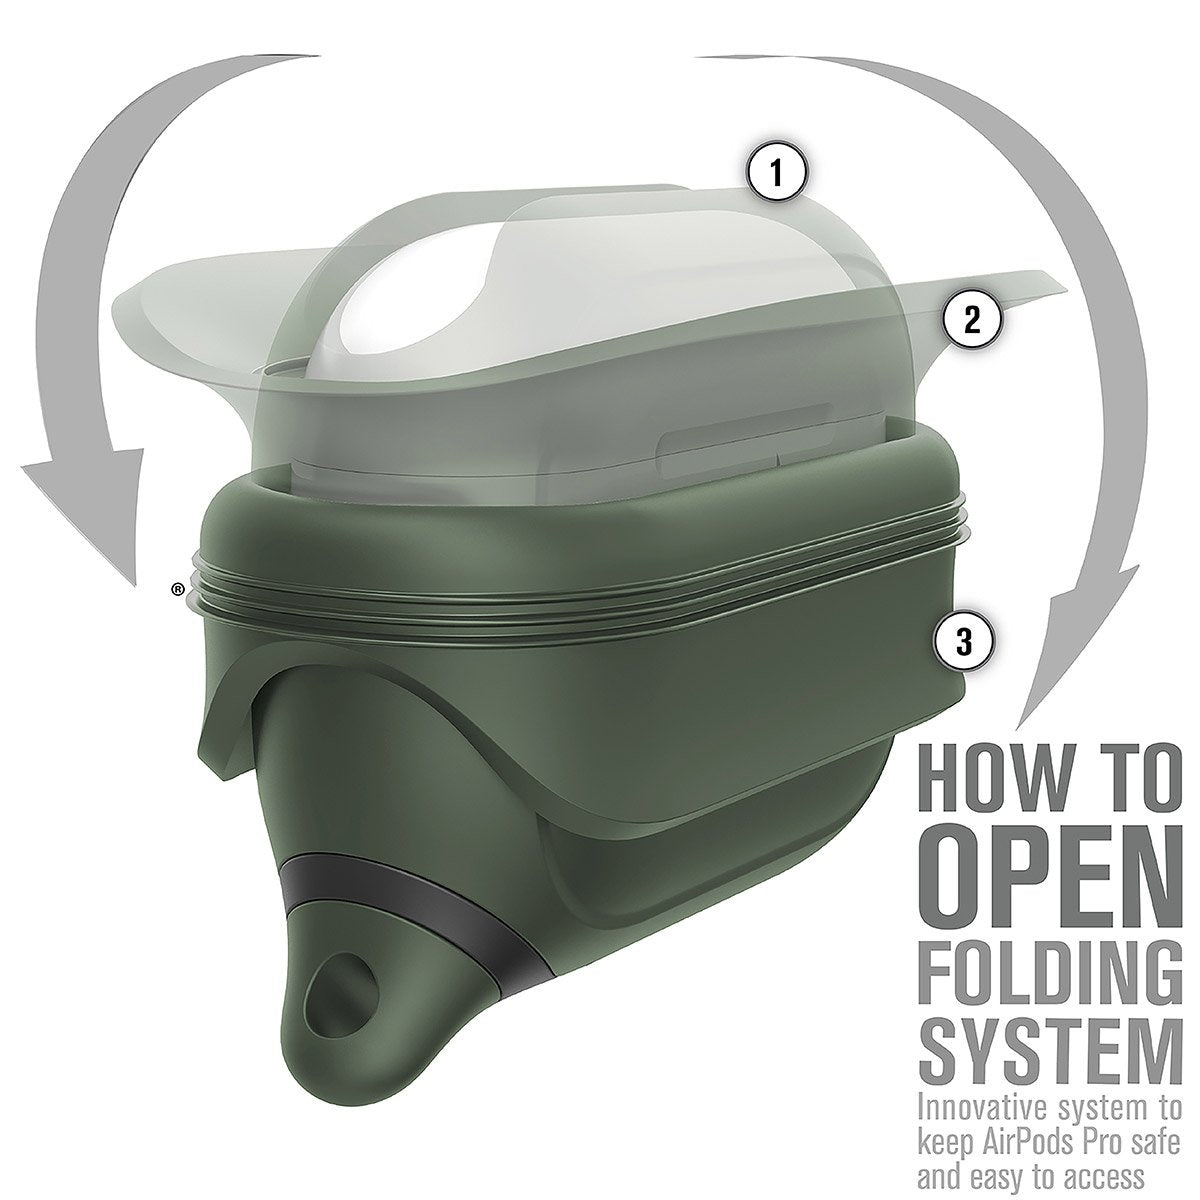 CATAPDPROGRN | catalyst airpods pro gen 2 1 waterproof case carabiner army green with arrows on how to open the case text reads how to open folding system innovative system to keep airpods pro safe and easy to access